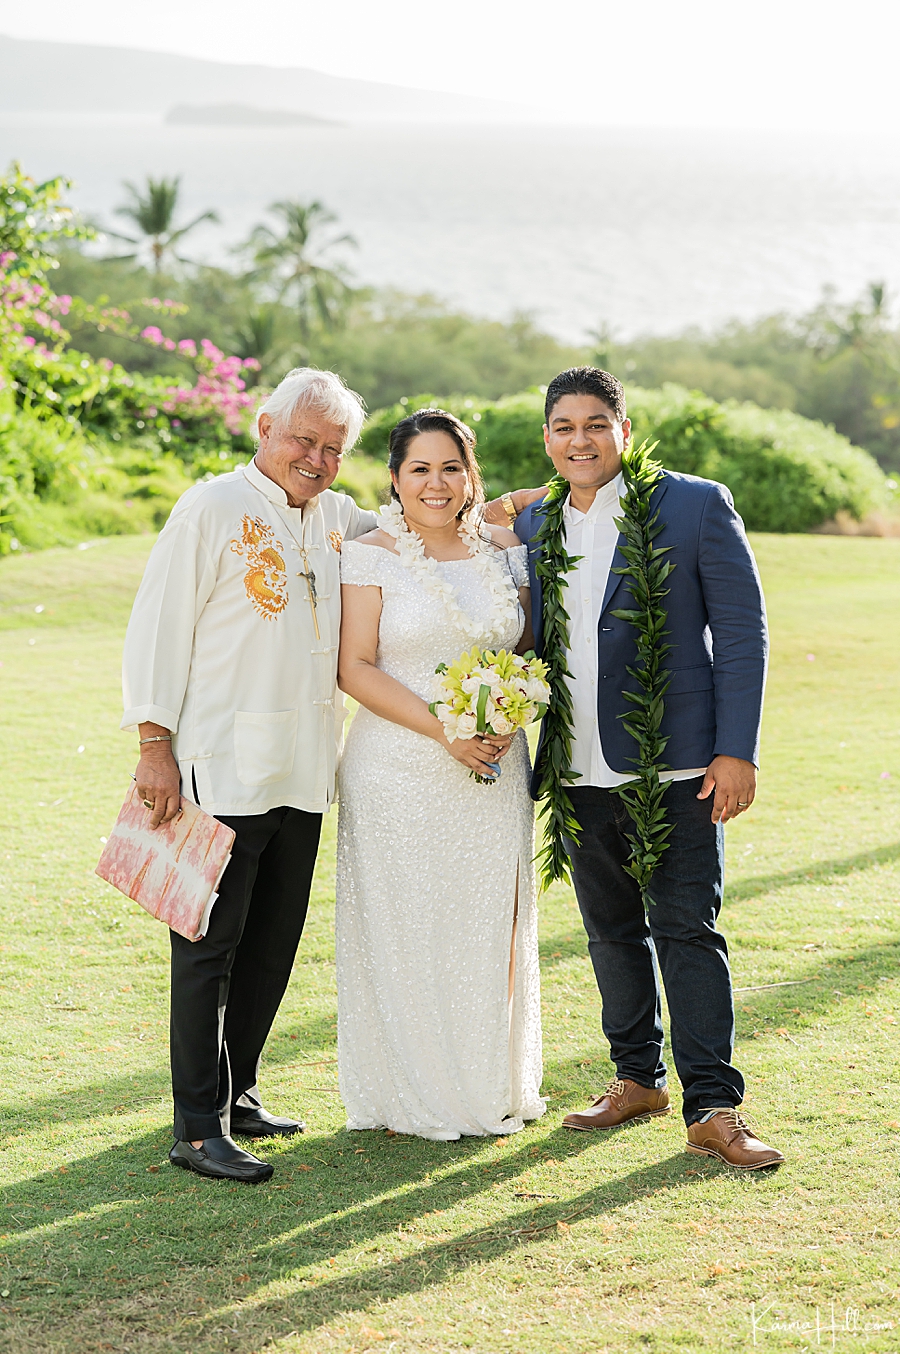 Maui wedding ministers and Officiants